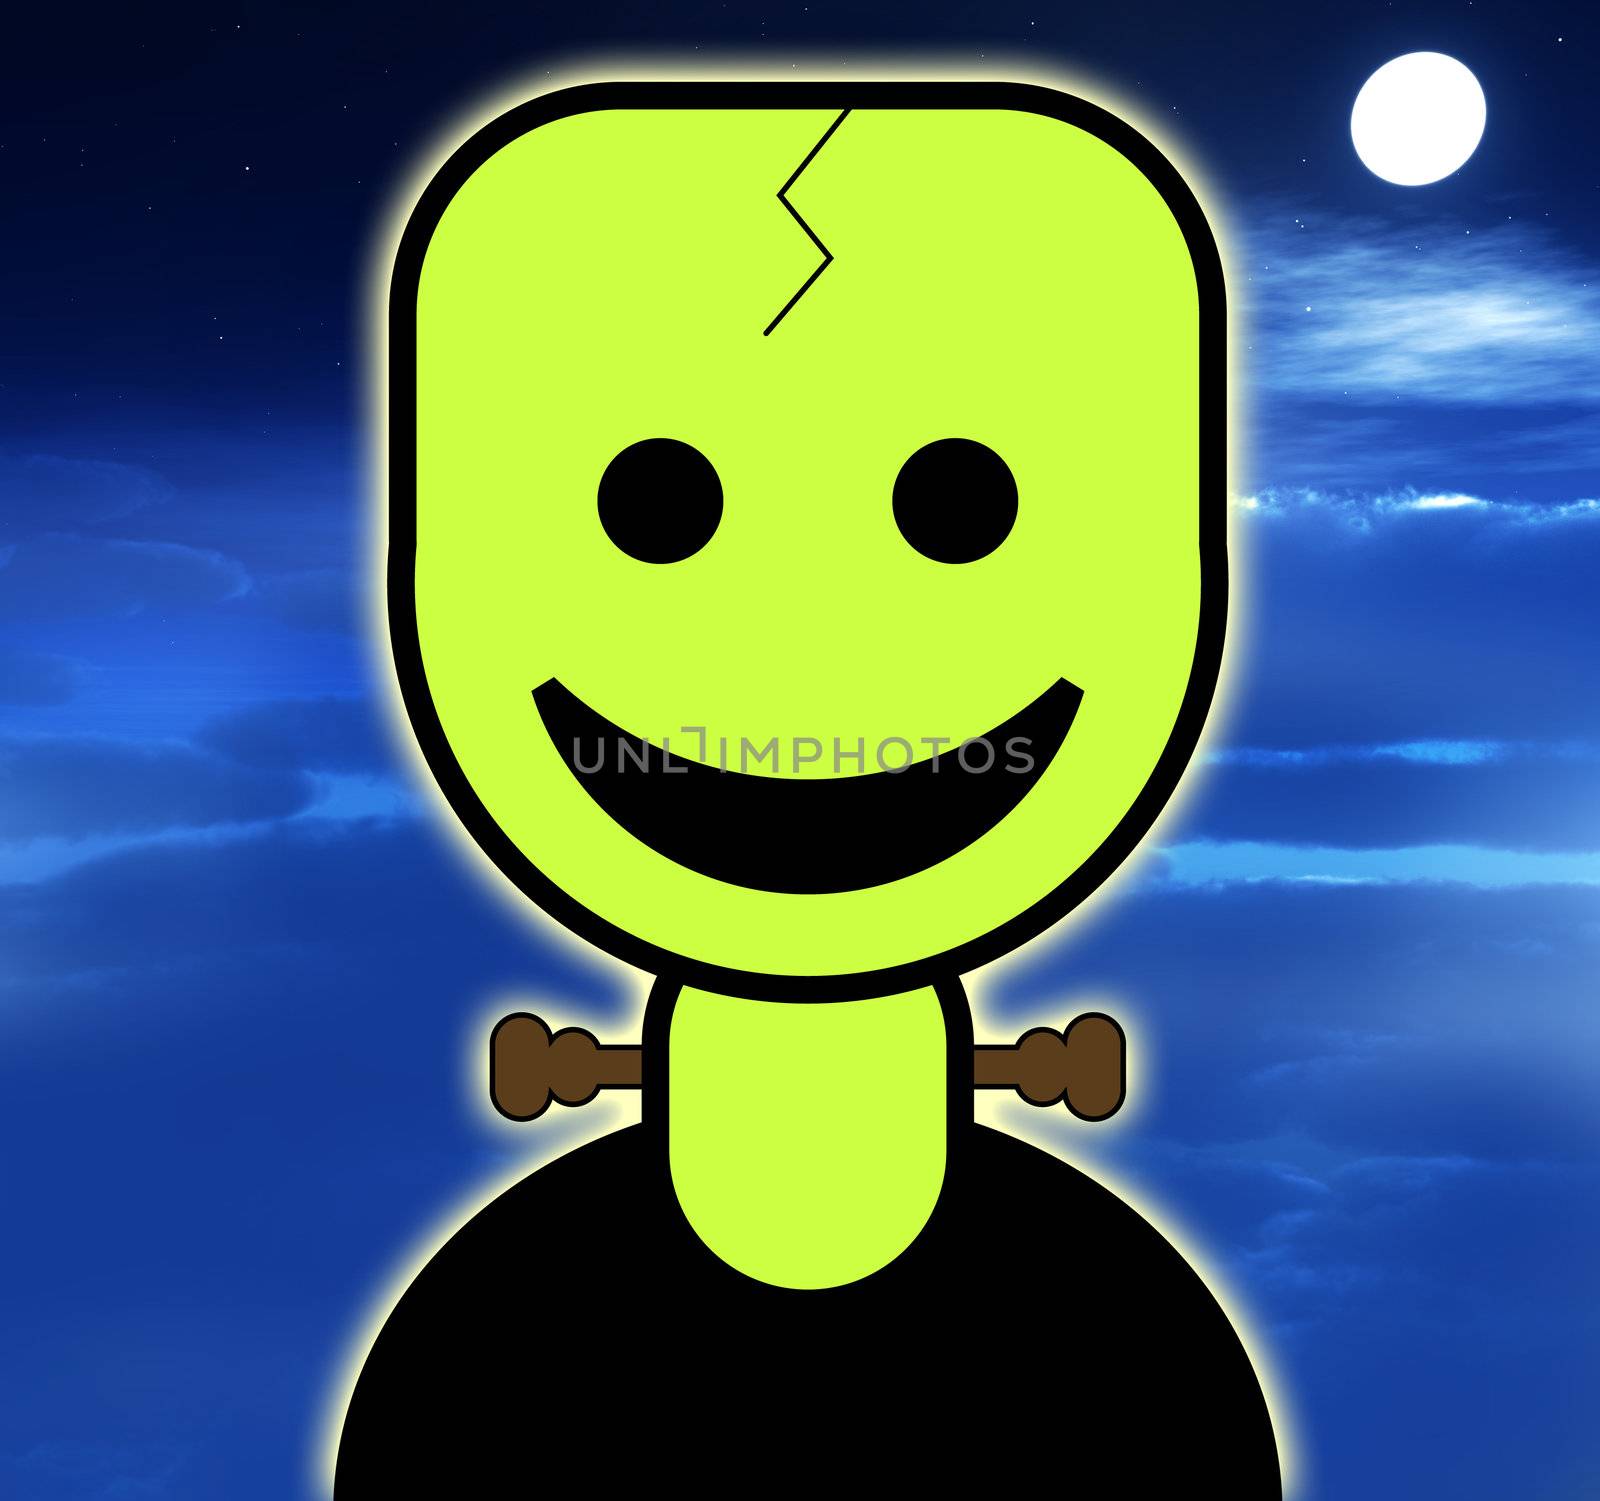 A cute and friendly cartoon Frankenstein for the Halloween holiday.